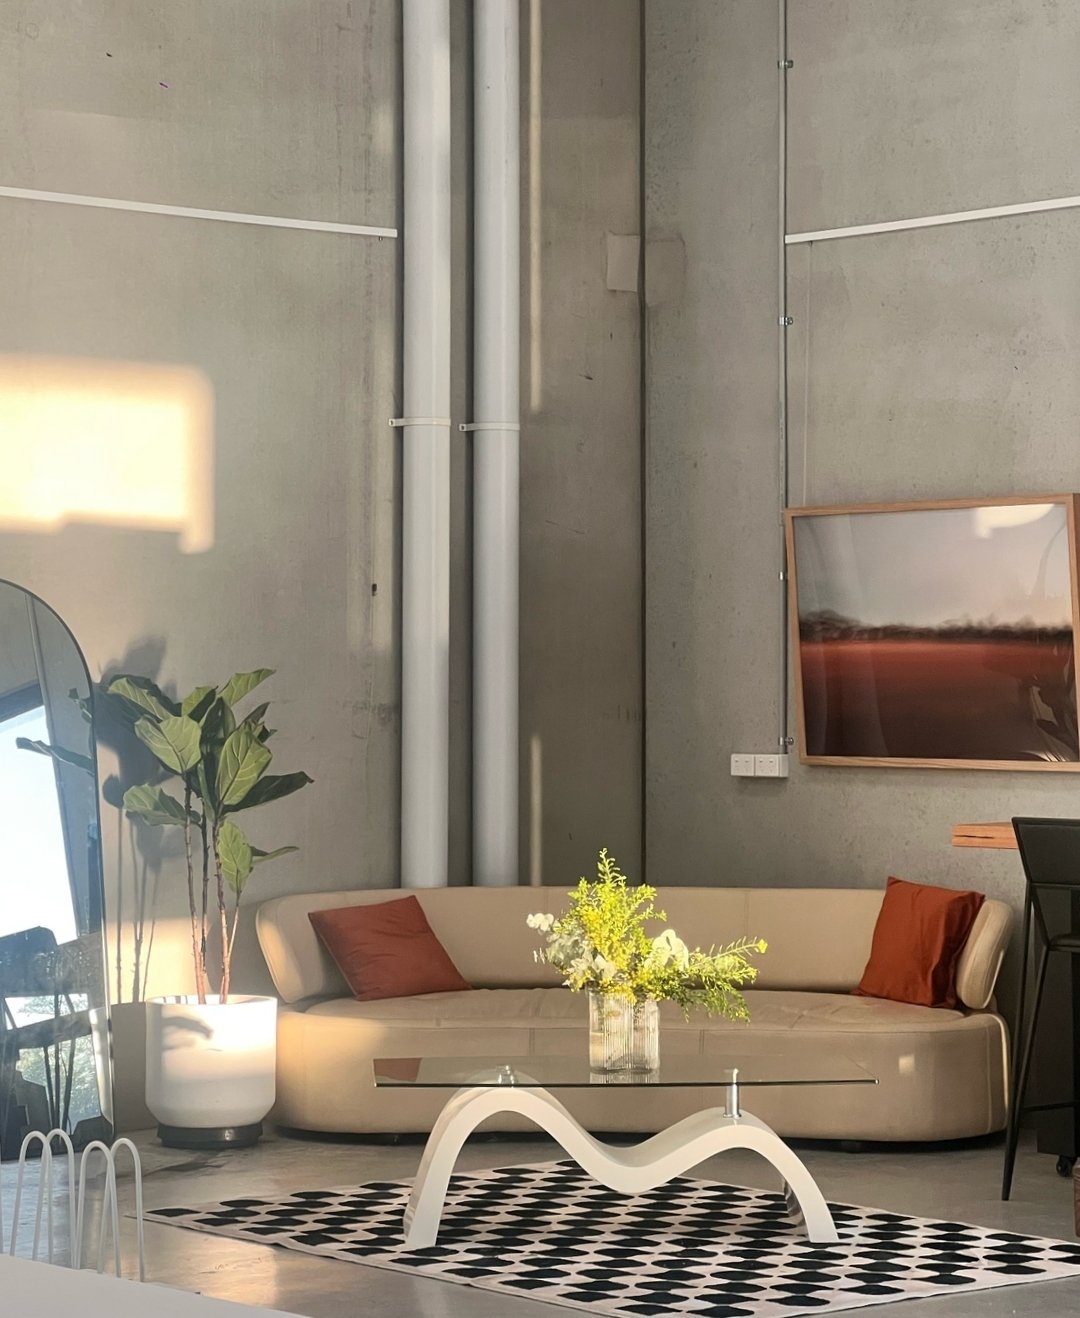 Need a Natural lit Studio? 

Pictured: Our client lounge basking in the sun from our abundance of natural light in studio ☀️